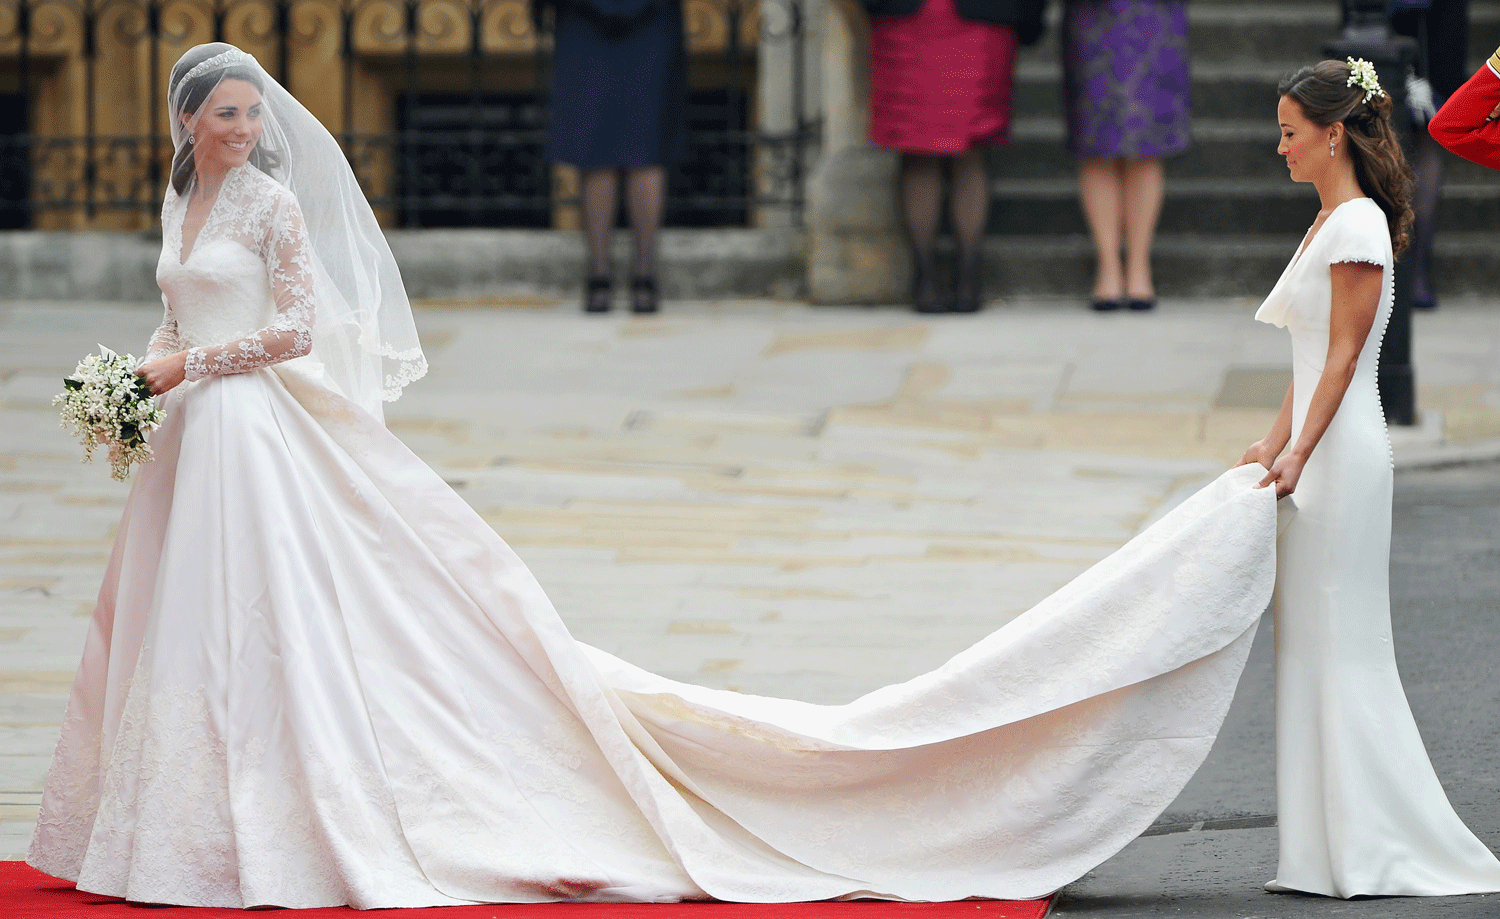 The Most Memorable Wedding Dresses Of The Last Decade